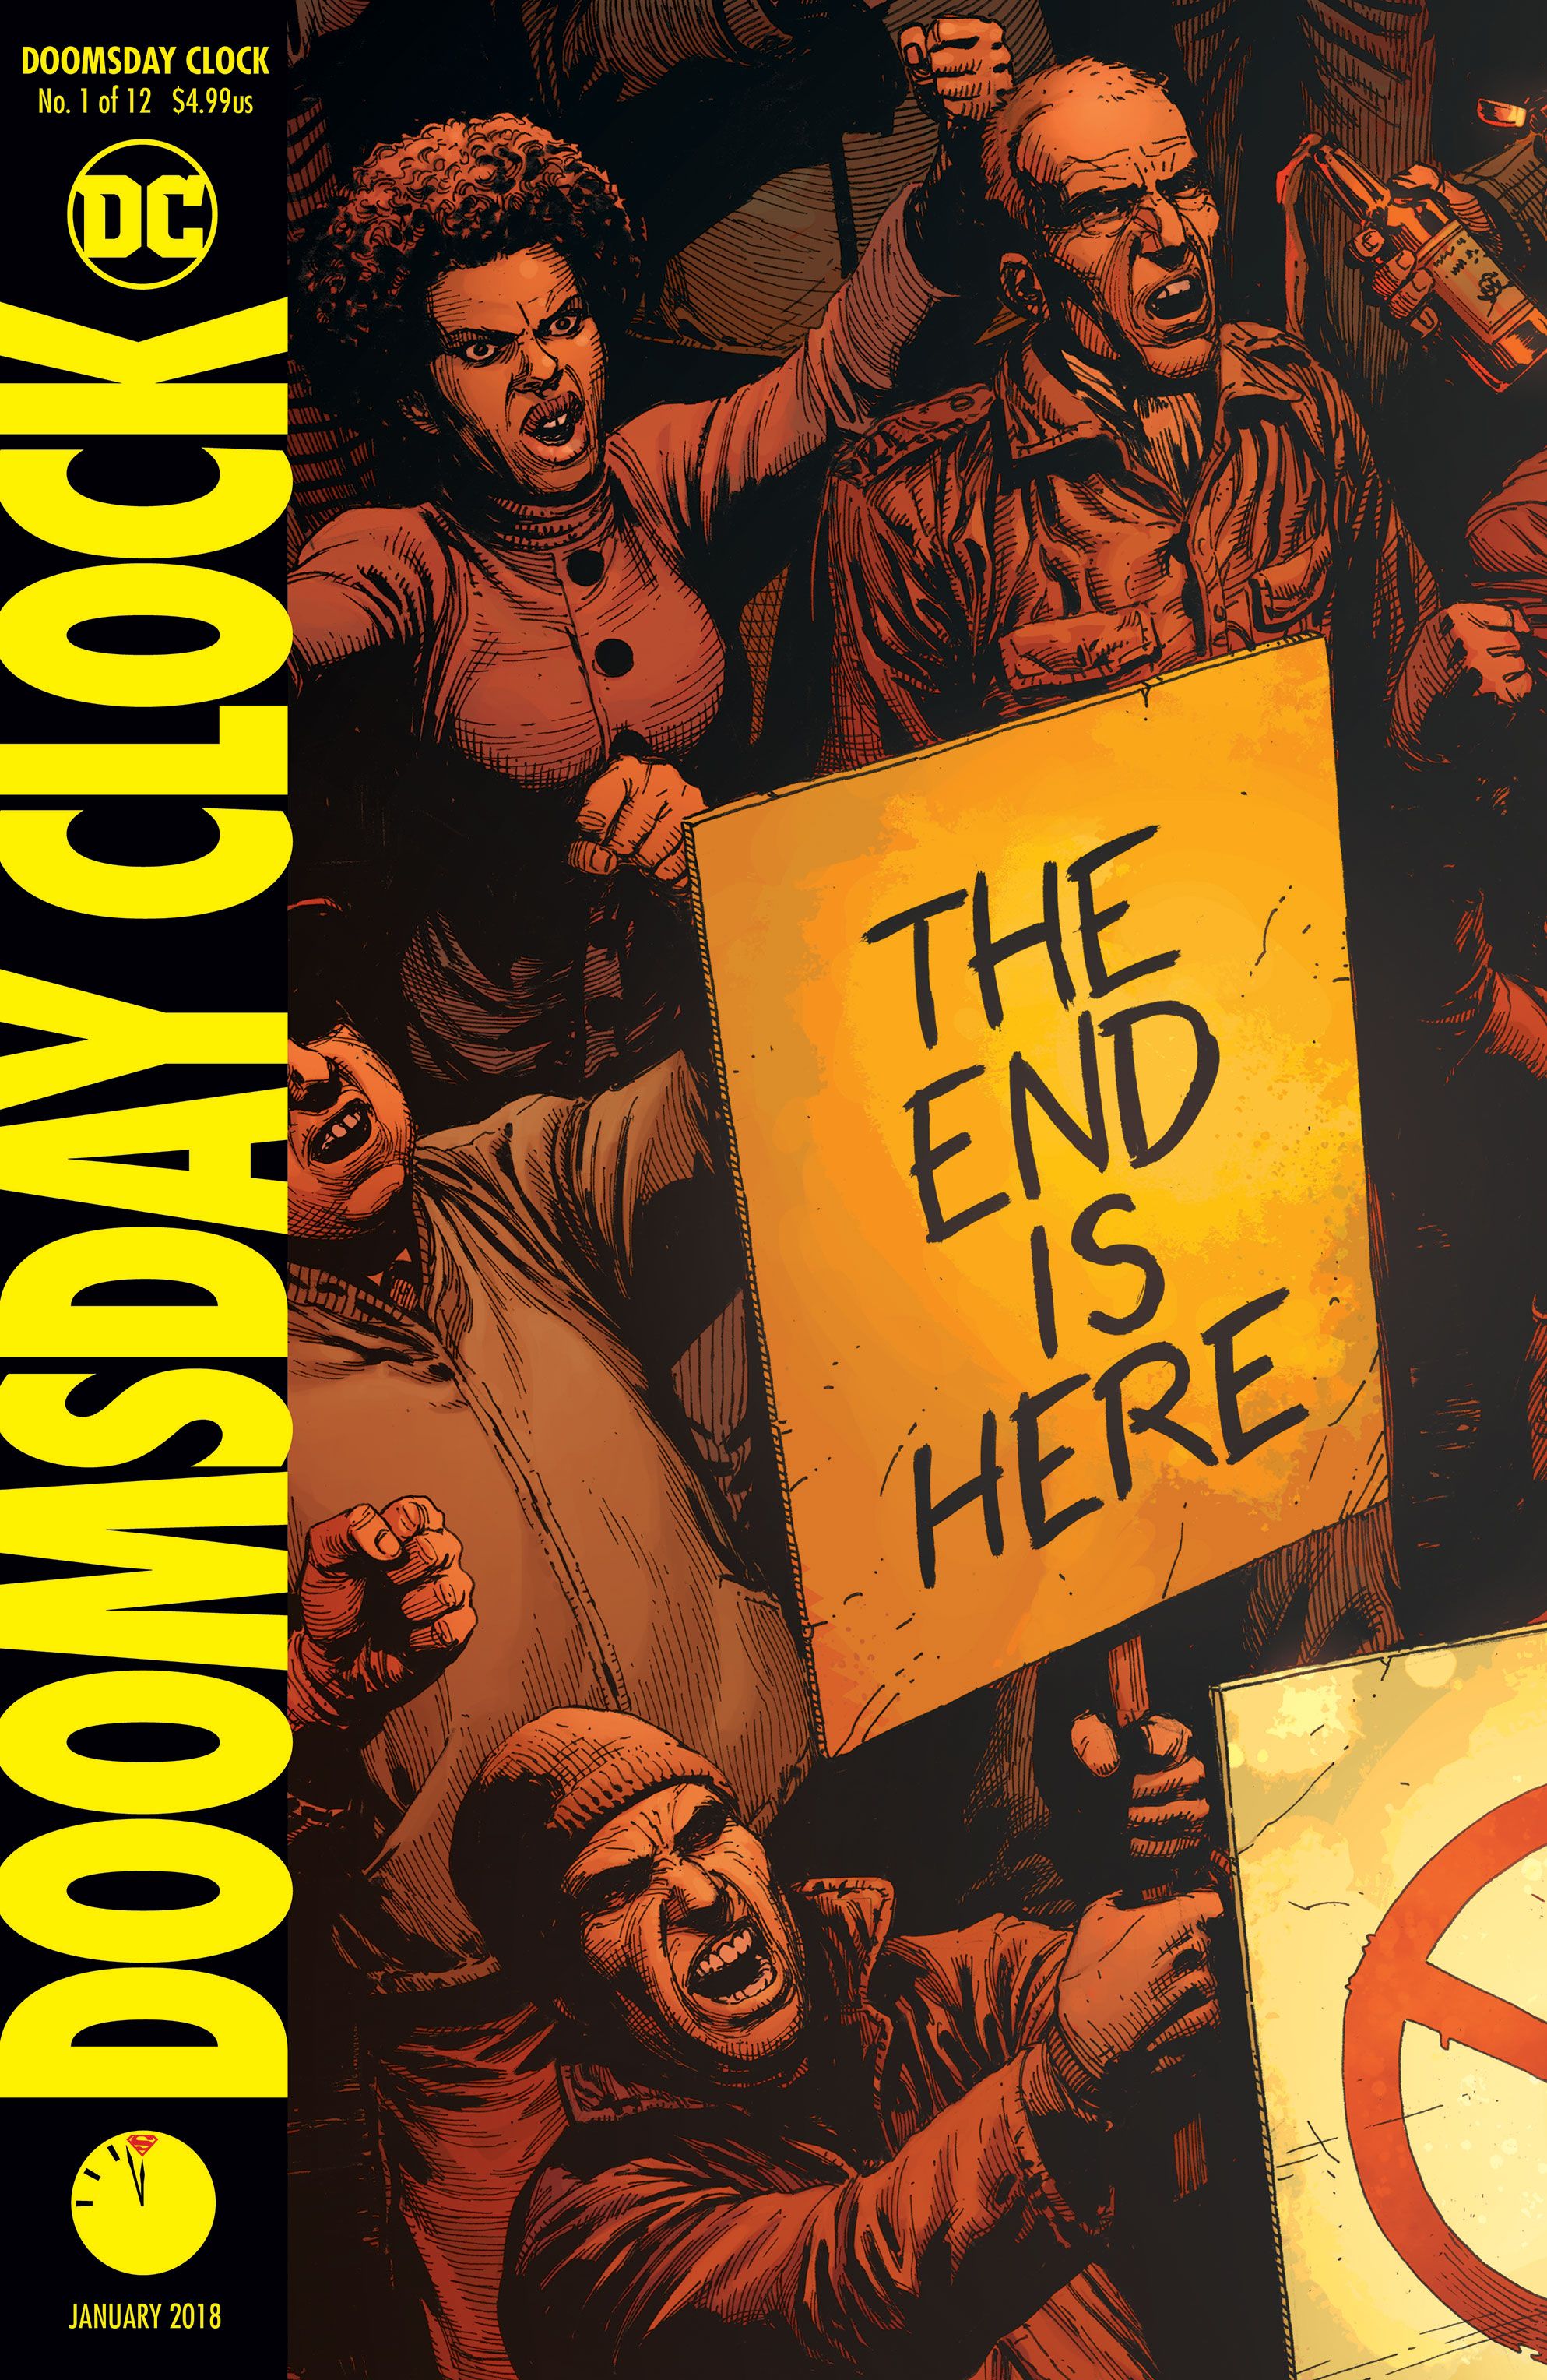 Doomsday Clock 1 main cover by series artist Gary Frank. 